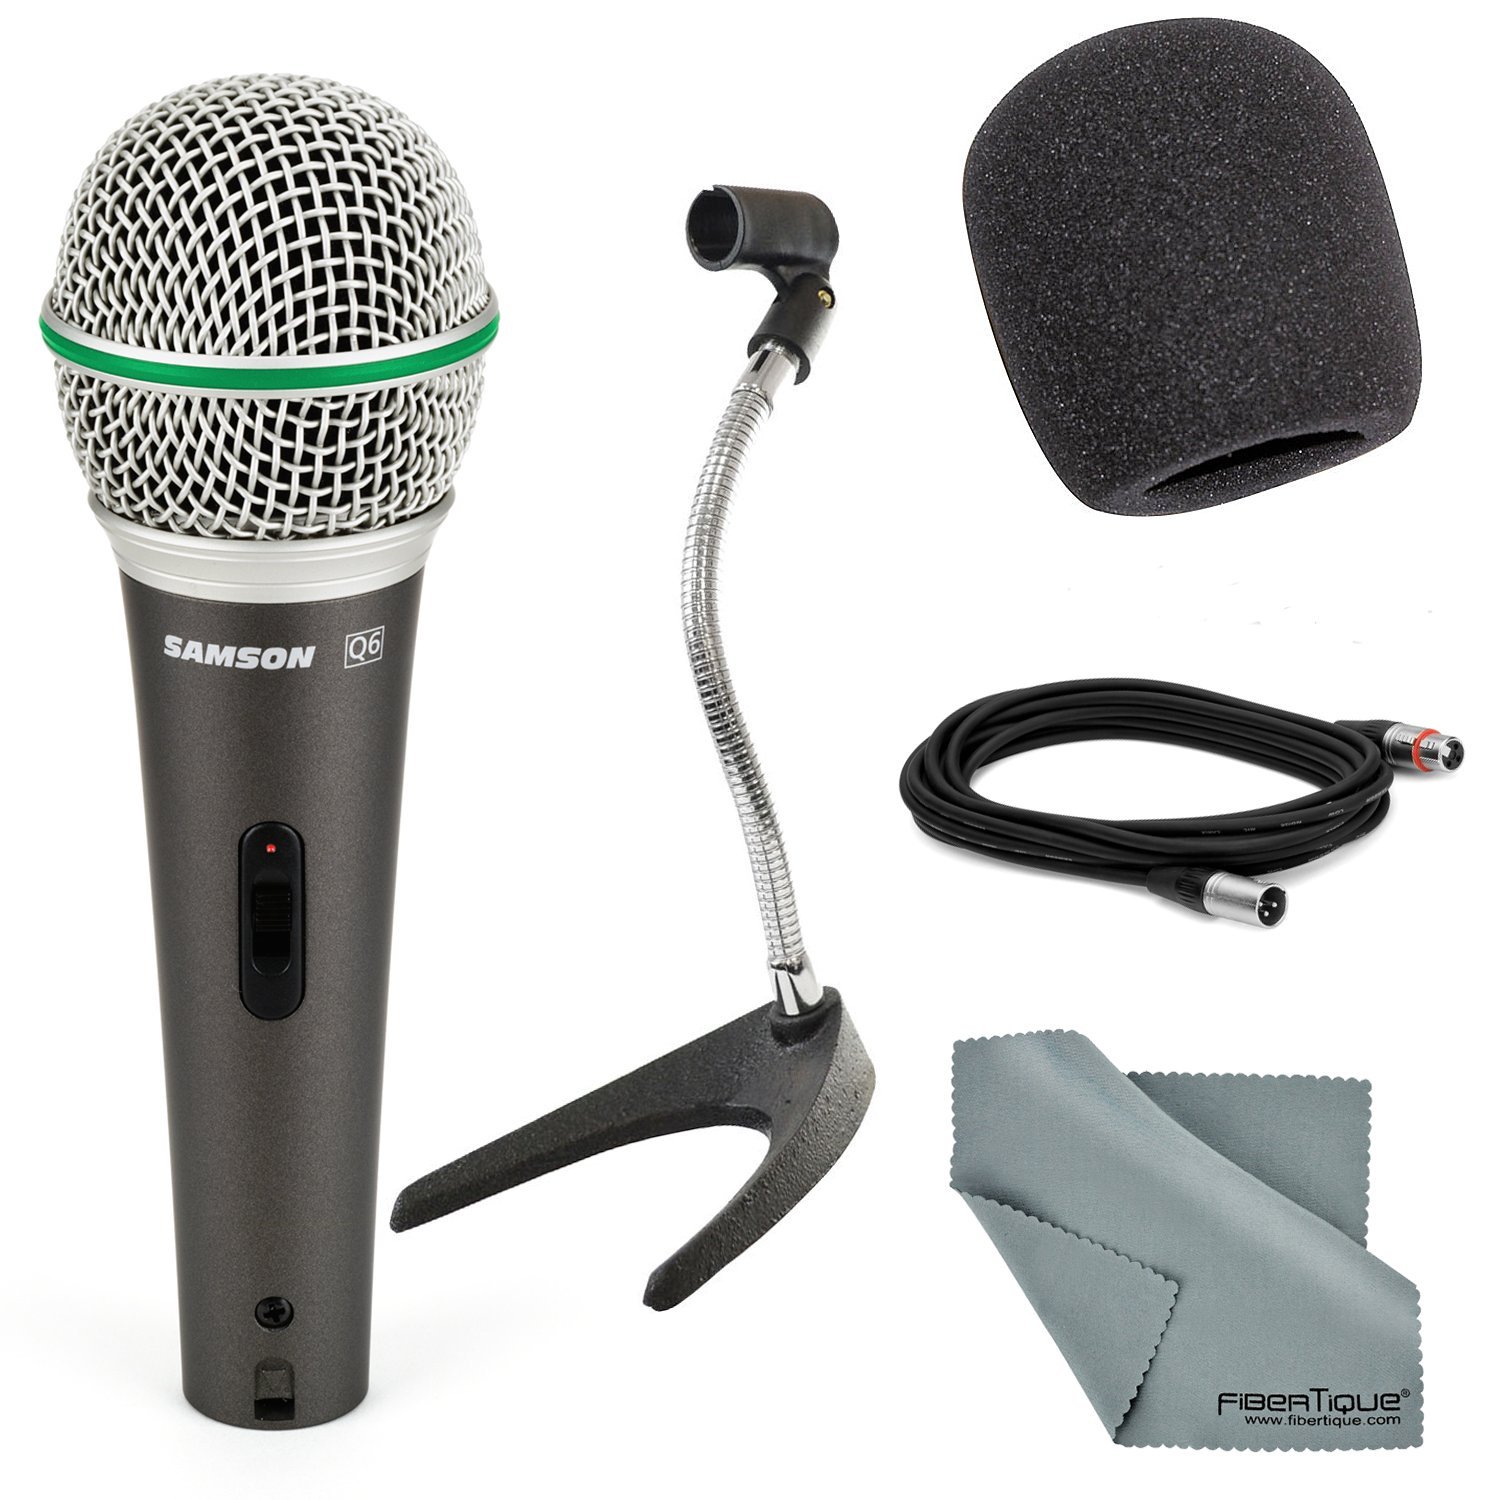 Samson Q6 Handheld Microphone Bundle with Desktop Microphone Stand + Mic Muff + XLR Cable + Fibertique Cleaning Cloth - image 1 of 5